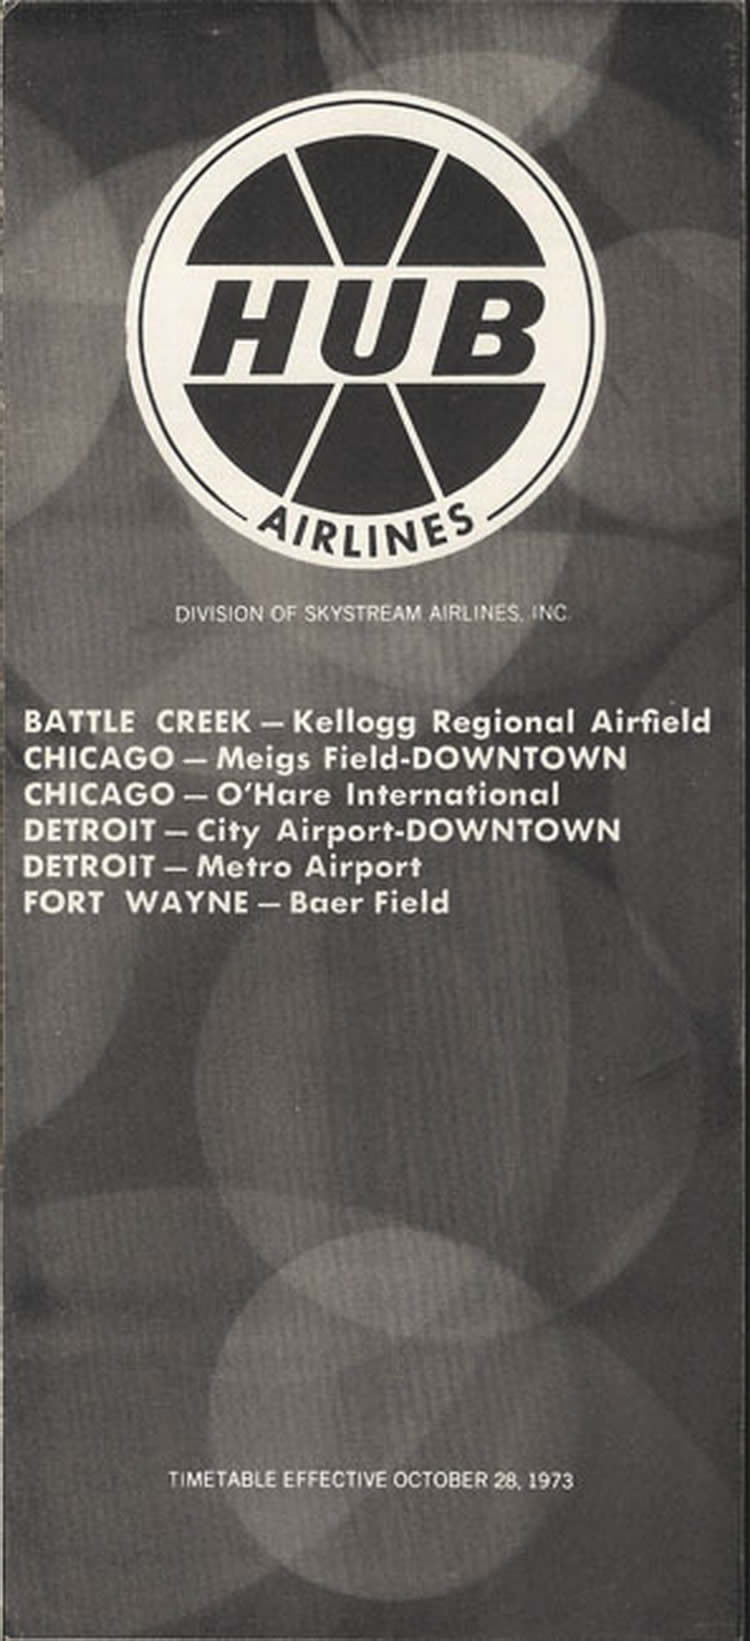 vintage airline timetable for HUB Airlines